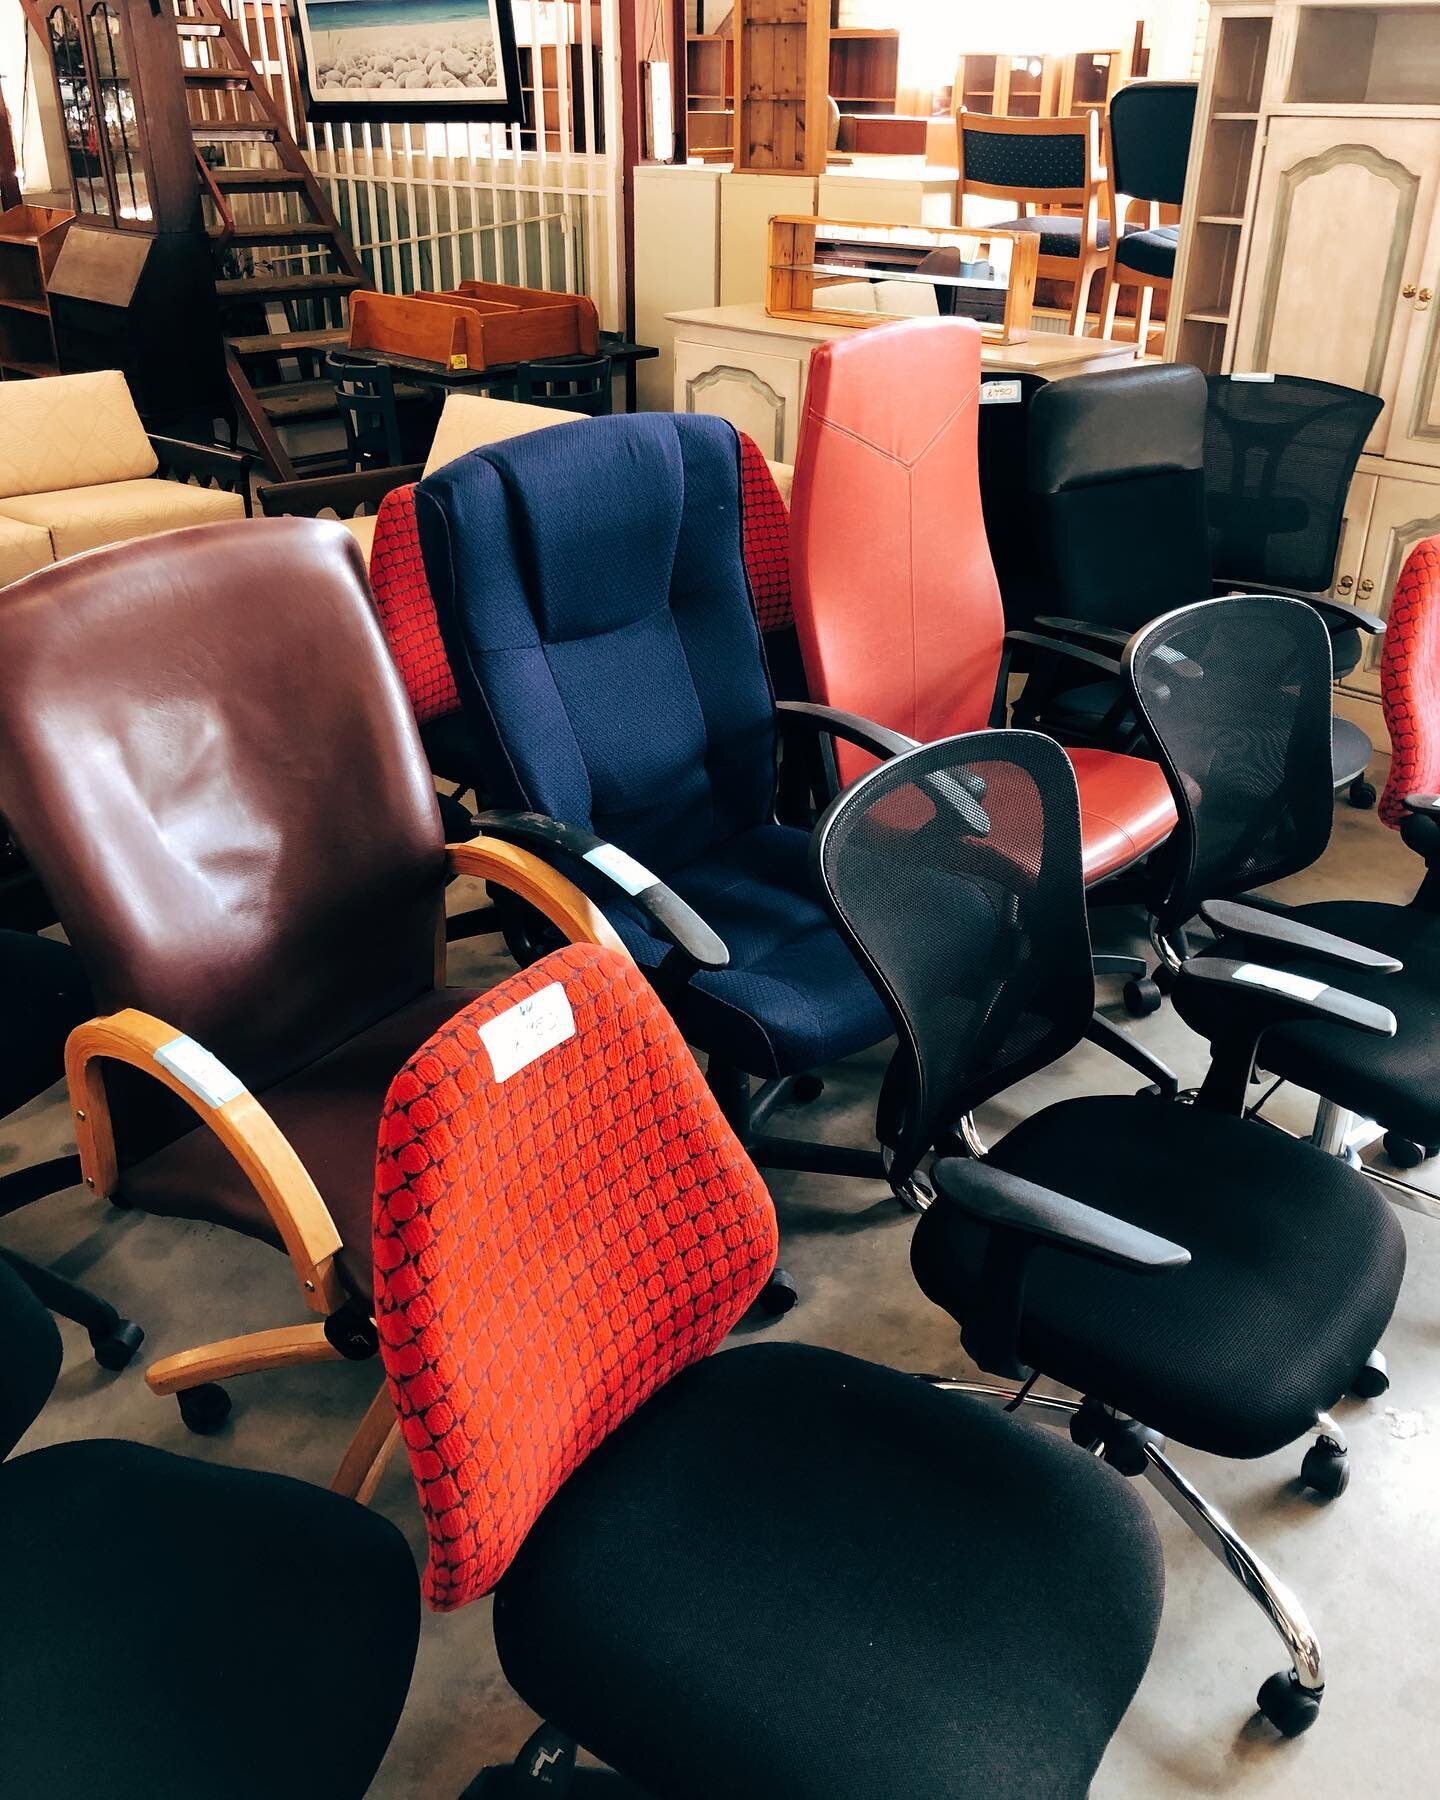 If you&rsquo;re looking for office chairs - we&rsquo;ve got you sorted!

They&rsquo;re all adjustable &amp; we have a nice variety of shapes, sizes &amp; colours.

We have 14 red &amp; black chairs in total - great for setting up an office or for tho